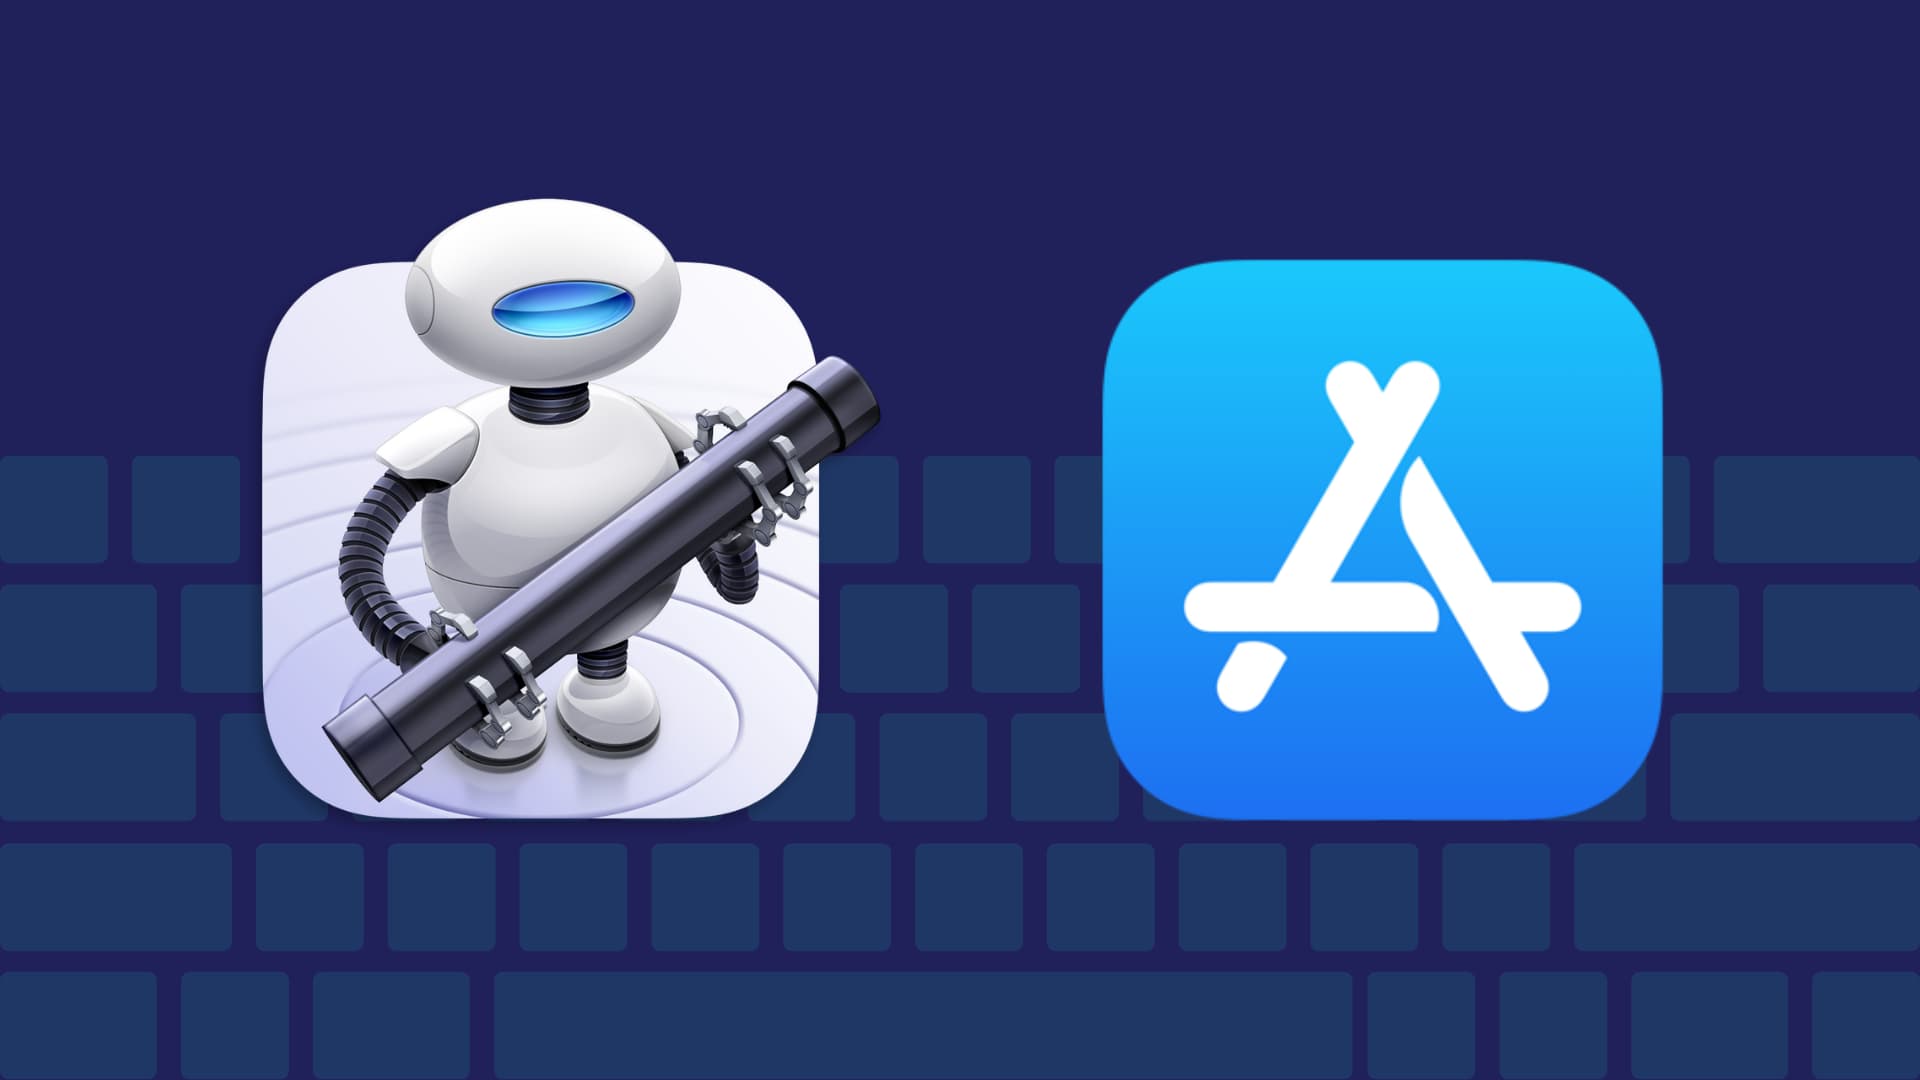 Automator and App Store icons with a keyboard in the background